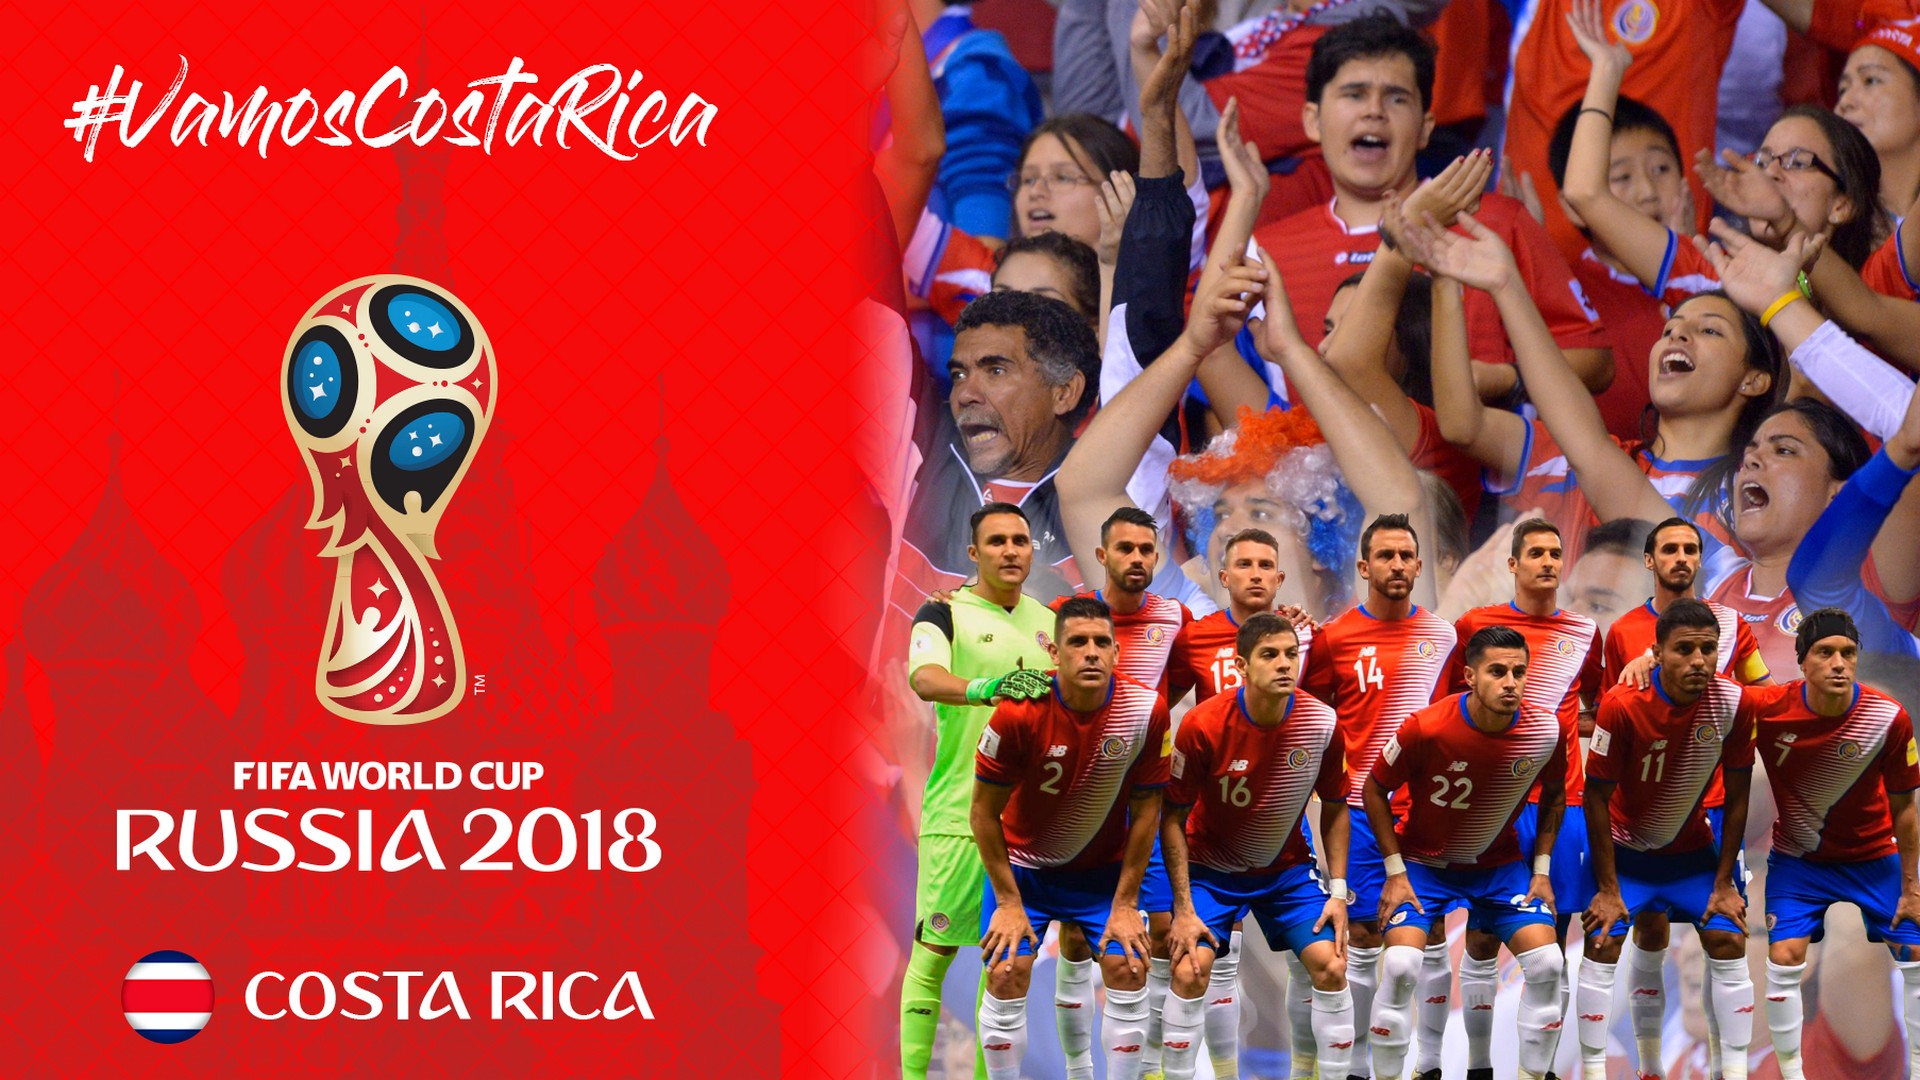 Costa Rica National Team Wallpaper HD With Resolution 1920X1080 pixel. You can make this wallpaper for your Mac or Windows Desktop Background, iPhone, Android or Tablet and another Smartphone device for free